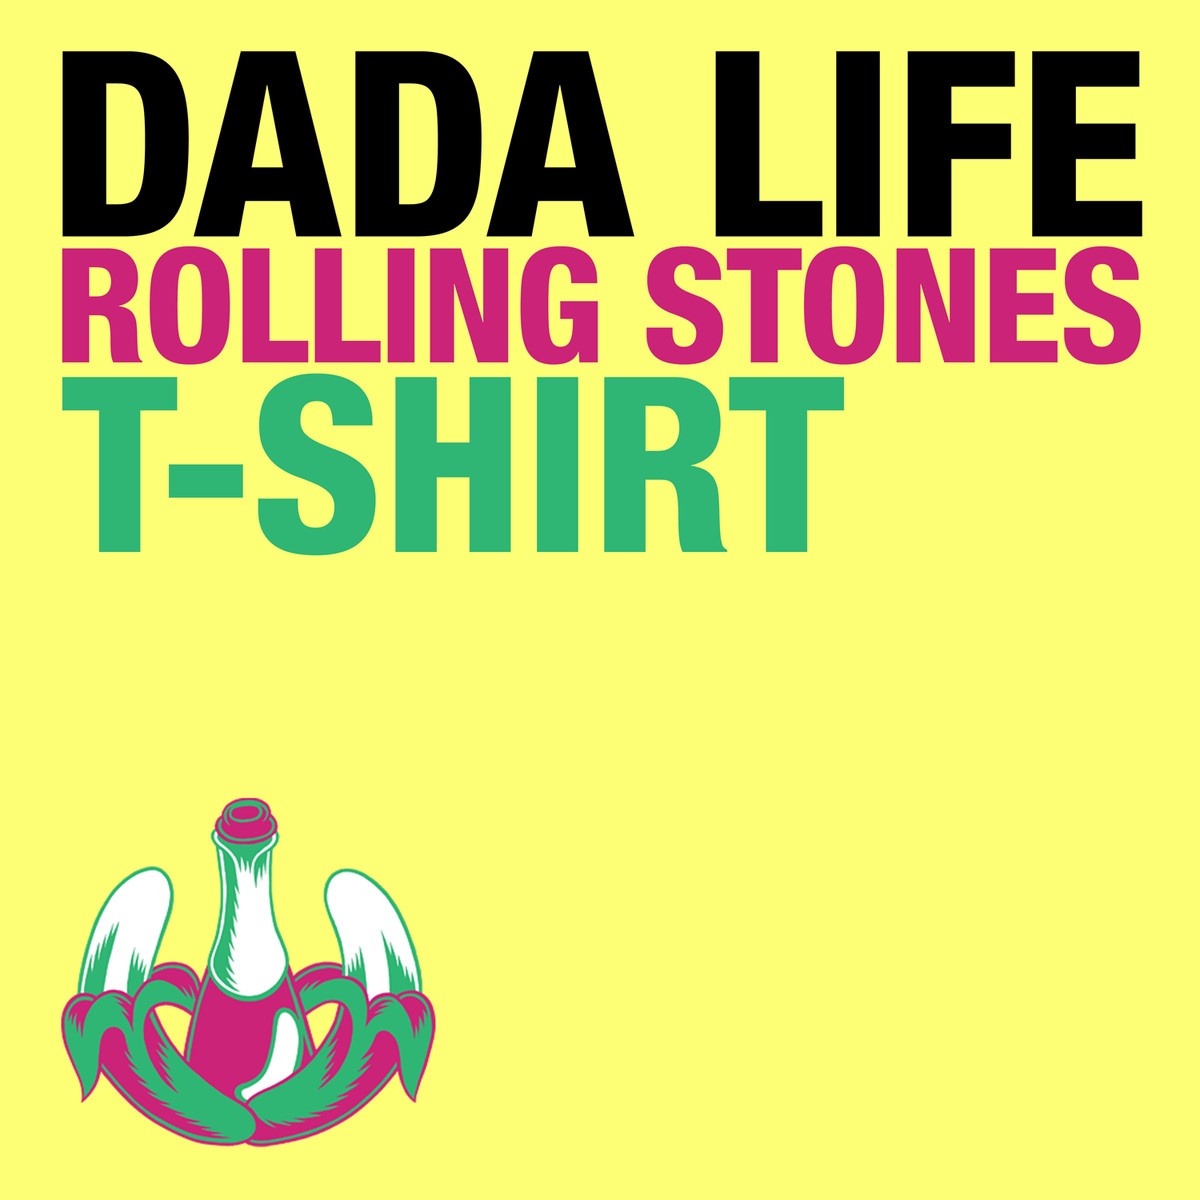 Rolling Stones T-Shirt (Cazzette Approaching Starry Homes Remix)